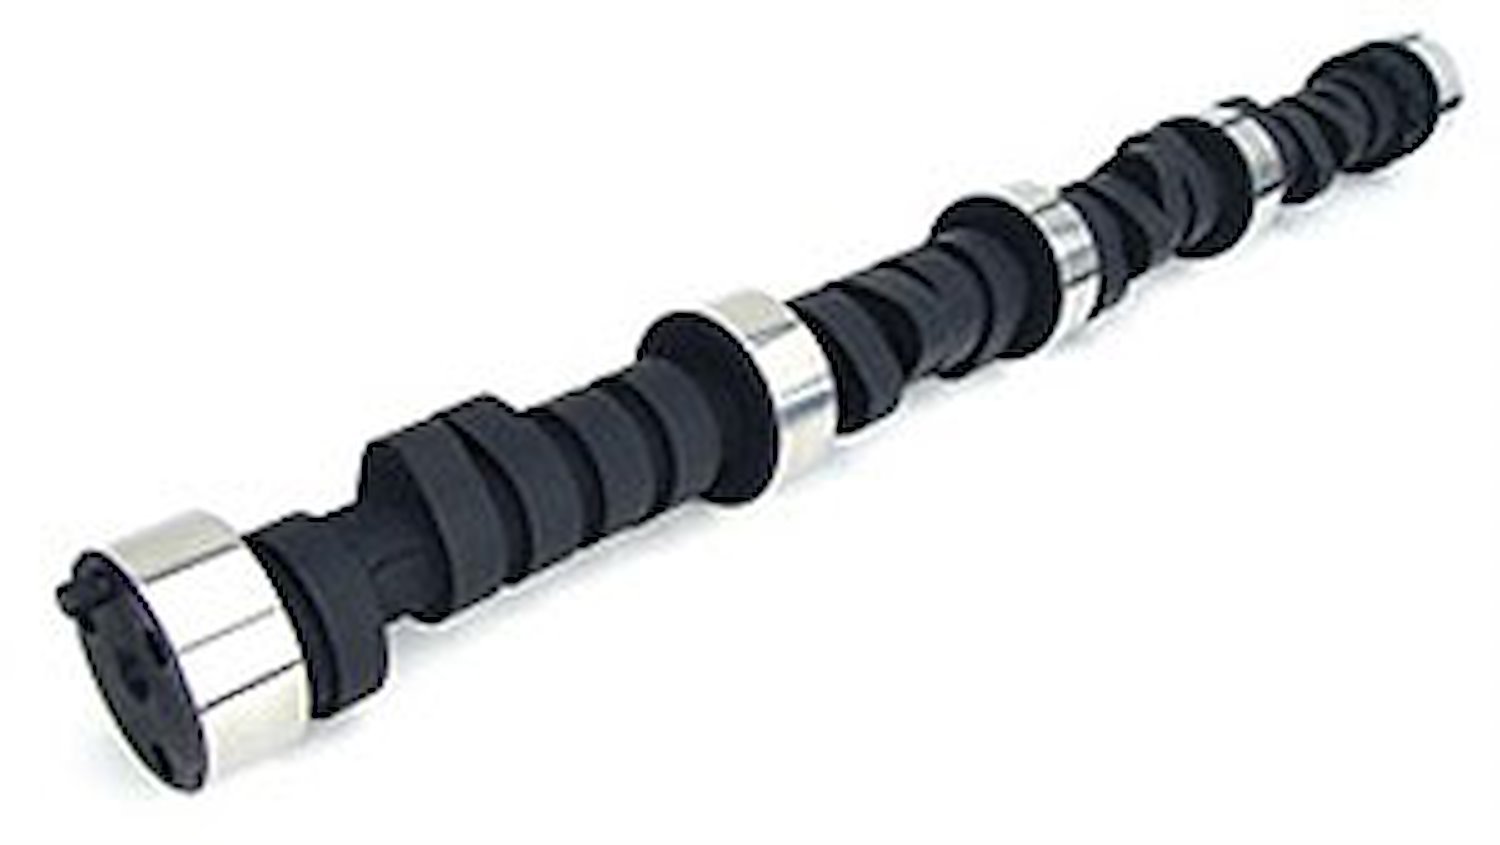 Xtreme Energy 250H Hydraulic Flat Tappet Camshaft Only Lift .470"/.475" Duration 250°/260° RPM Range 600-4800